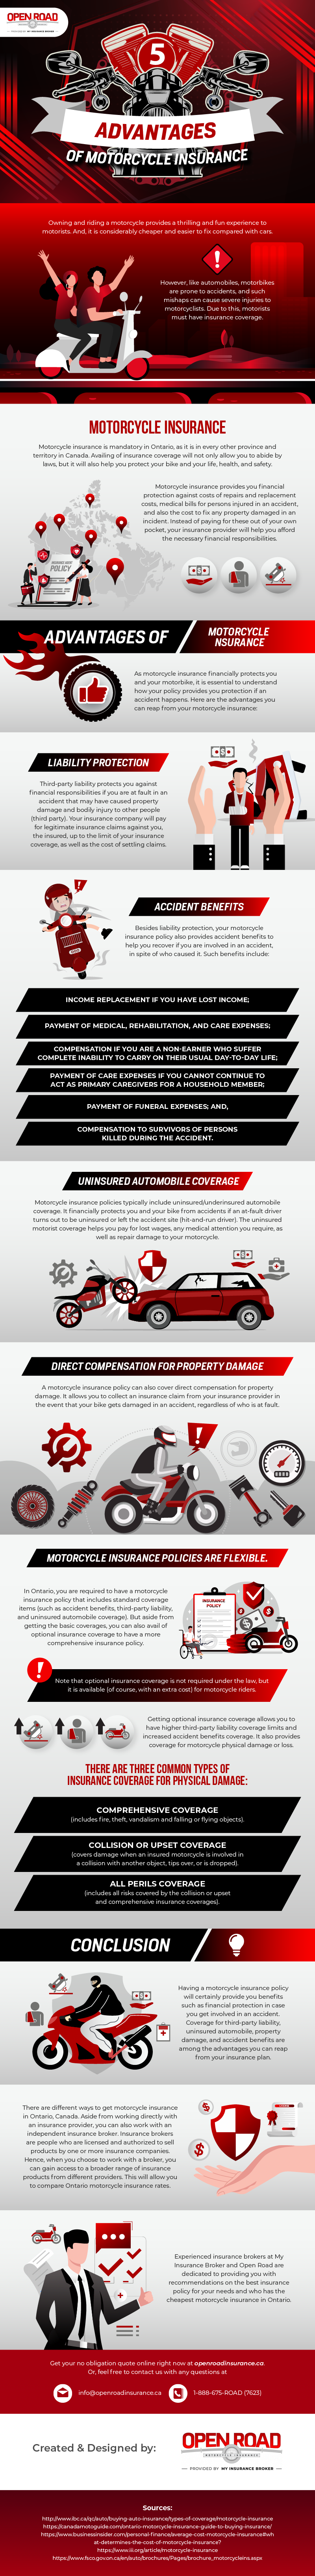  5 Advantages of Motorcycle Insurance